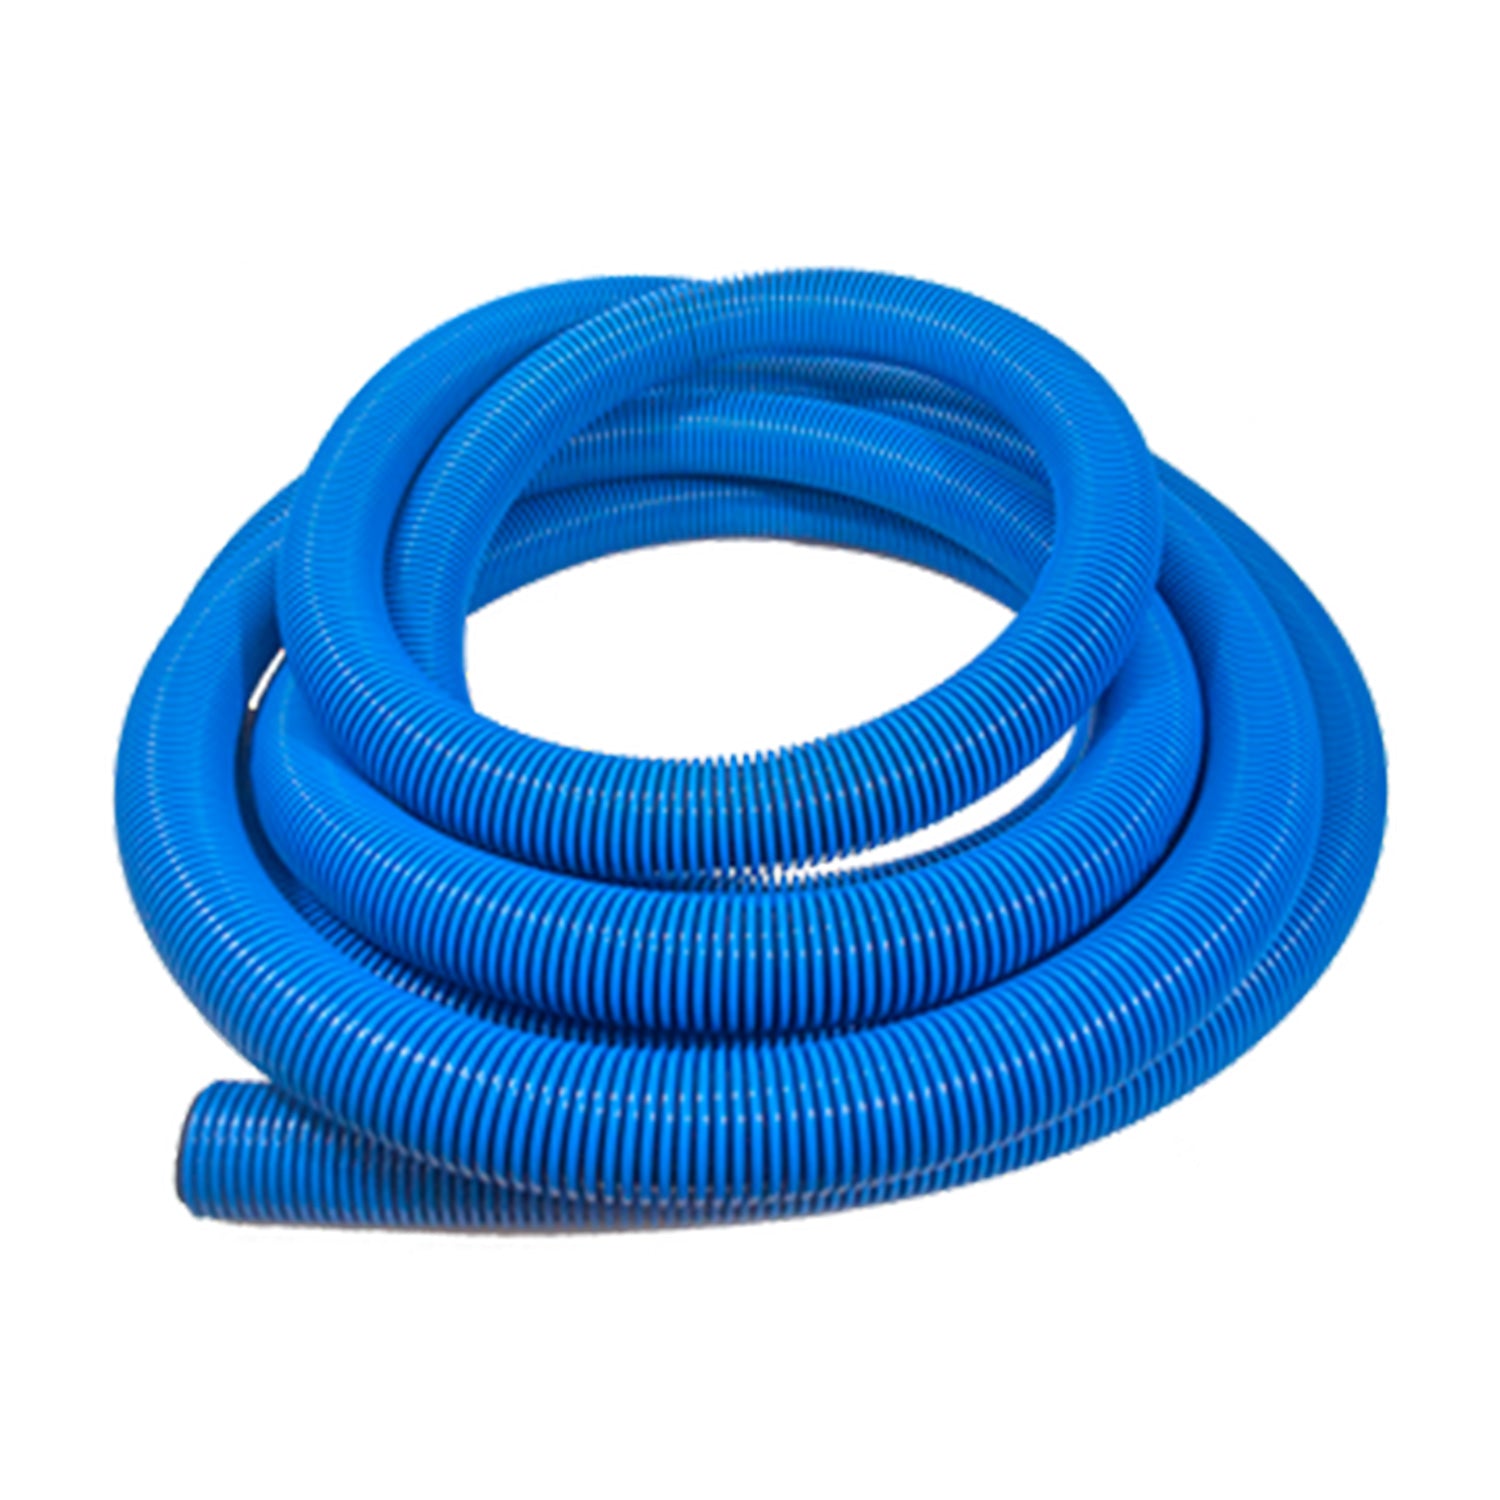 Dependable Blue Vacuum Hoses for Cleaning Tasks